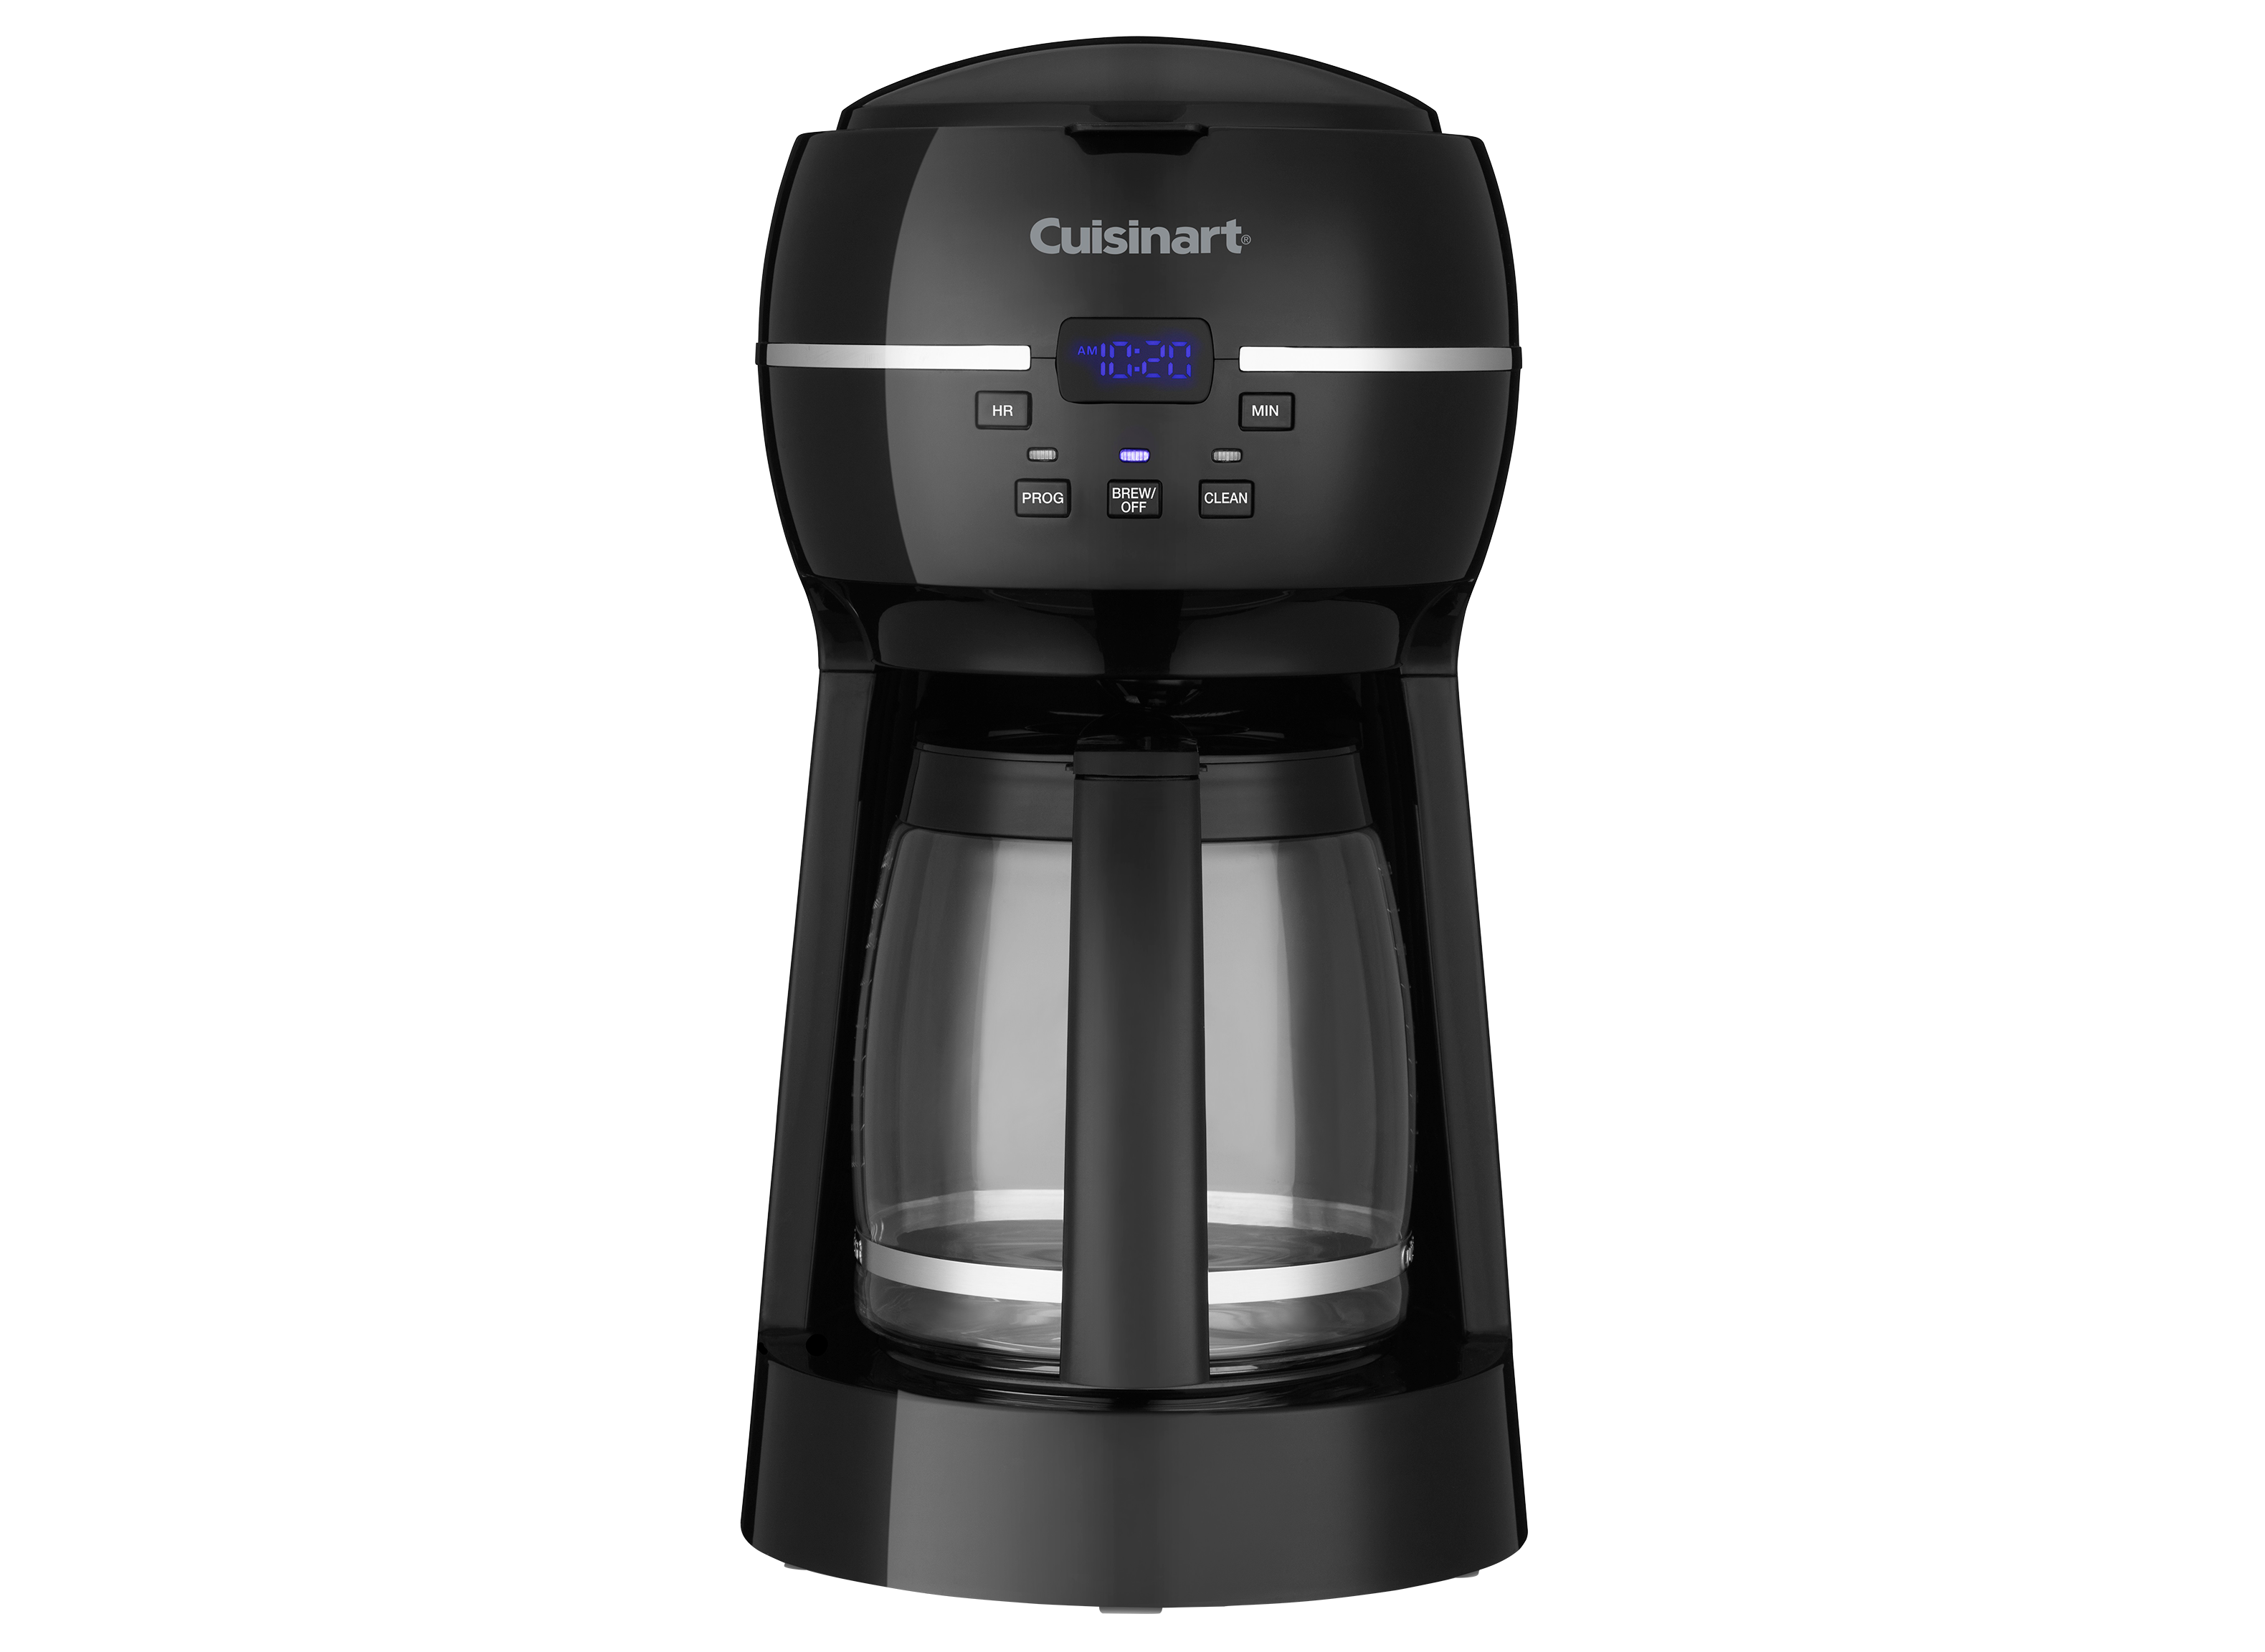 https://crdms.images.consumerreports.org/prod/products/cr/models/404051-drip-coffee-makers-with-carafe-cuisinart-12-cup-dcc-1500-10021171.png